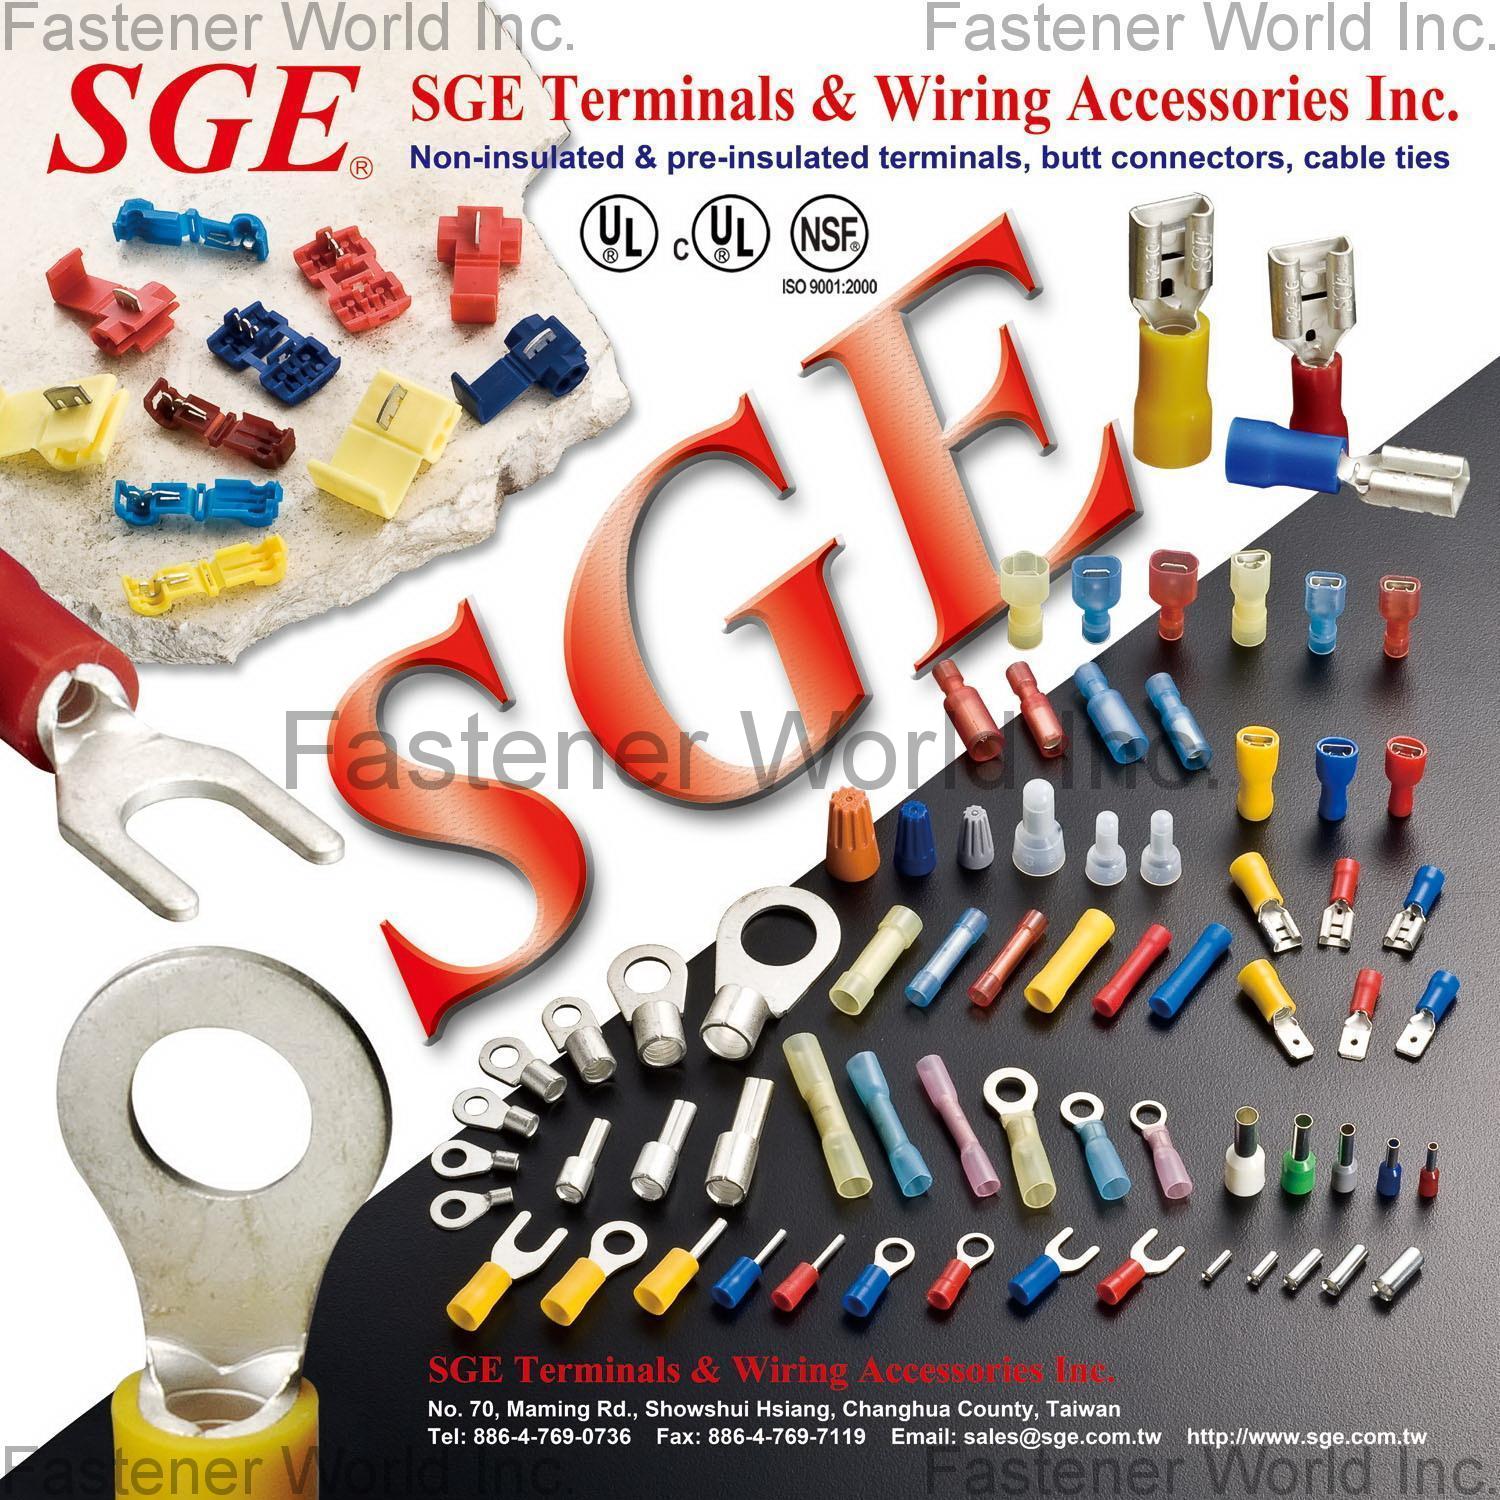 SGE TERMINALS & WIRING ACCESSORIES INC. , wiring terminals, cable terminals, cable lug, cord end ferrules, flag terminals, electrical connector, electrical terminals, pre insulated terminals, faston, push on connectors, quick connectors, aftermarket wire nut, cable terminals, DIN46234 ring terminals , Automotive Parts